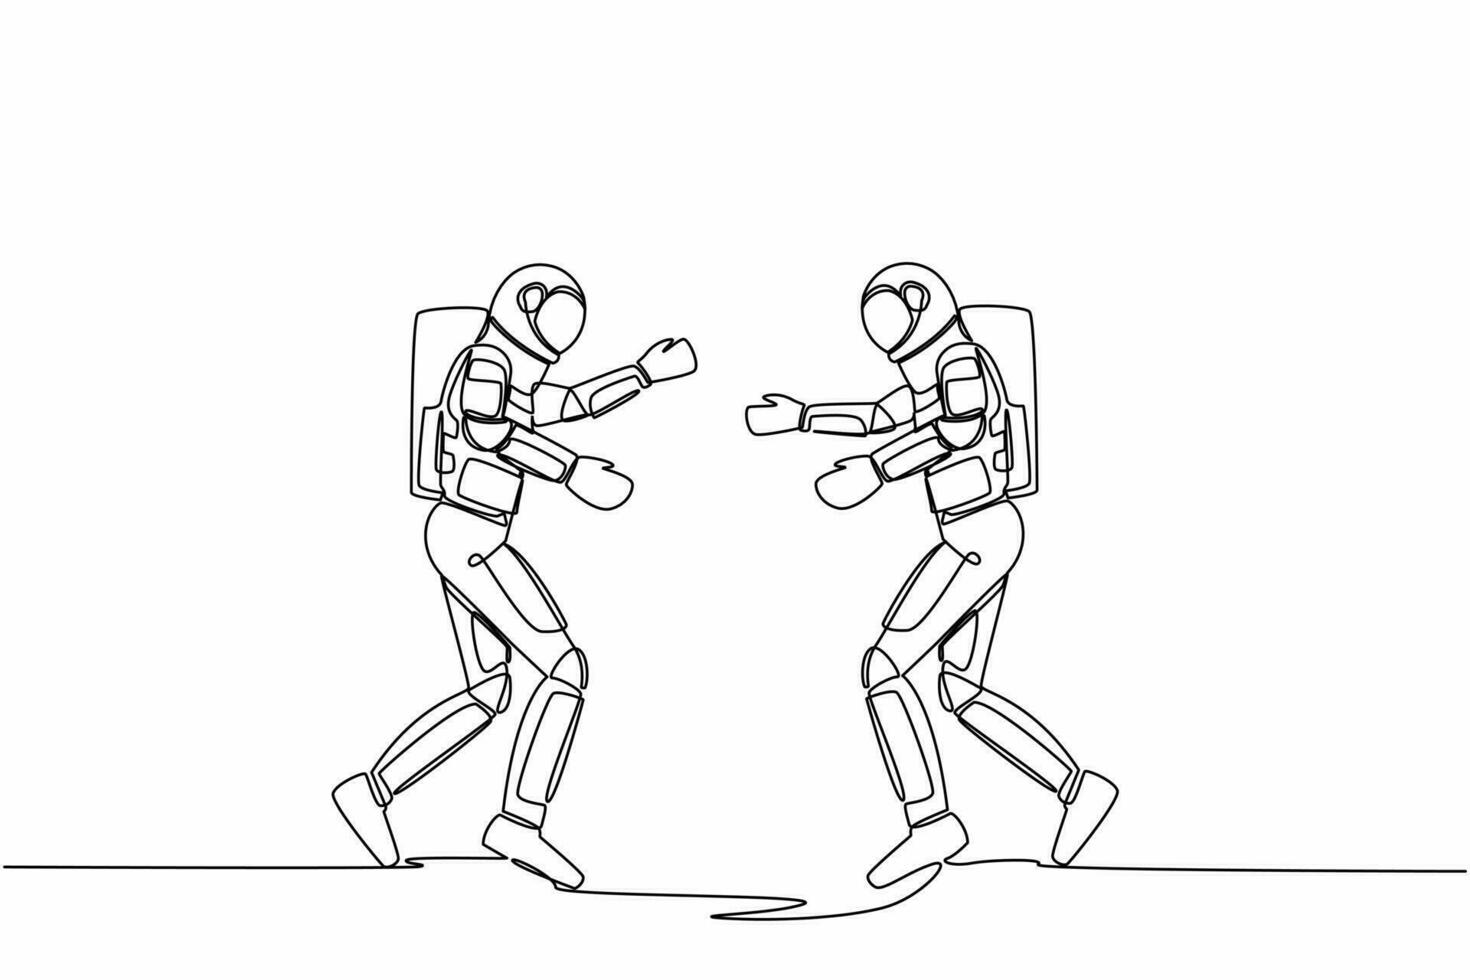 Single one line drawing two young astronaut running face to face while getting ready to hug. Break a happiness between two friends. Cosmic galaxy space. Continuous line draw design vector illustration